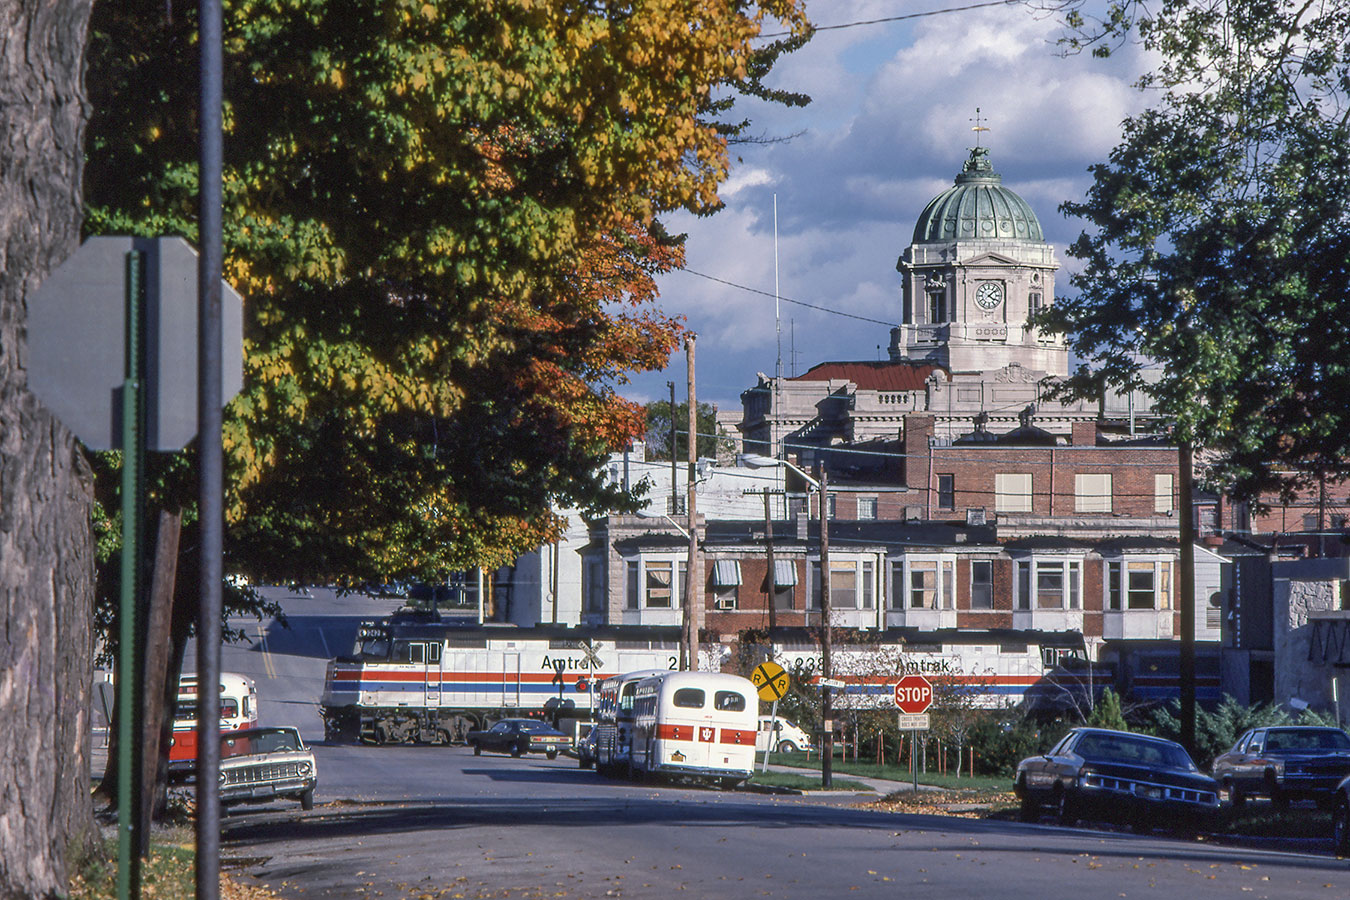 "Monroe County Courthouse": A northbound Amtrak "Floridian" makes a station stop in Bloomington. We are looking eastward along West 6th Street, with the iconic Monroe County Courthouse beyond. The building just behind the train now houses Janko’s Little Zagreb. The date of the photograph is October 16, 1977. | Photo by Richard Koenig